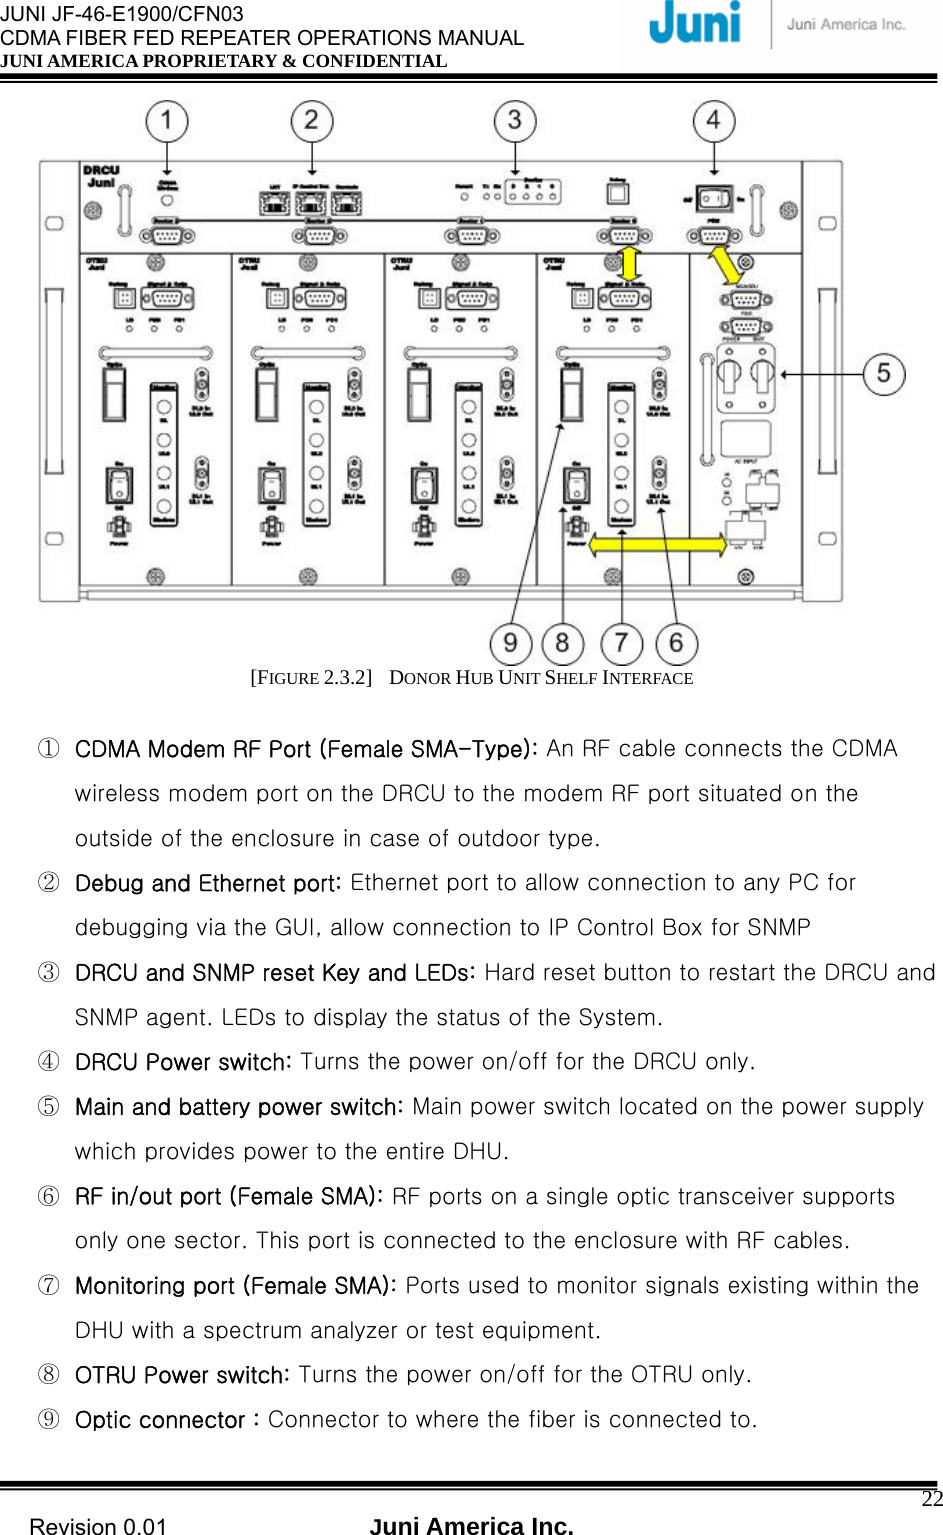  JUNI JF-46-E1900/CFN03 CDMA FIBER FED REPEATER OPERATIONS MANUAL JUNI AMERICA PROPRIETARY &amp; CONFIDENTIAL                                   Revision 0.01  Juni America Inc.  22 [FIGURE 2.3.2]  DONOR HUB UNIT SHELF INTERFACE  ①  CDMA Modem RF Port (Female SMA-Type): An RF cable connects the CDMA wireless modem port on the DRCU to the modem RF port situated on the outside of the enclosure in case of outdoor type.   ②  Debug and Ethernet port: Ethernet port to allow connection to any PC for debugging via the GUI, allow connection to IP Control Box for SNMP ③  DRCU and SNMP reset Key and LEDs: Hard reset button to restart the DRCU and SNMP agent. LEDs to display the status of the System. ④  DRCU Power switch: Turns the power on/off for the DRCU only. ⑤  Main and battery power switch: Main power switch located on the power supply which provides power to the entire DHU. ⑥  RF in/out port (Female SMA): RF ports on a single optic transceiver supports only one sector. This port is connected to the enclosure with RF cables.   ⑦  Monitoring port (Female SMA): Ports used to monitor signals existing within the DHU with a spectrum analyzer or test equipment. ⑧  OTRU Power switch: Turns the power on/off for the OTRU only. ⑨  Optic connector : Connector to where the fiber is connected to. 